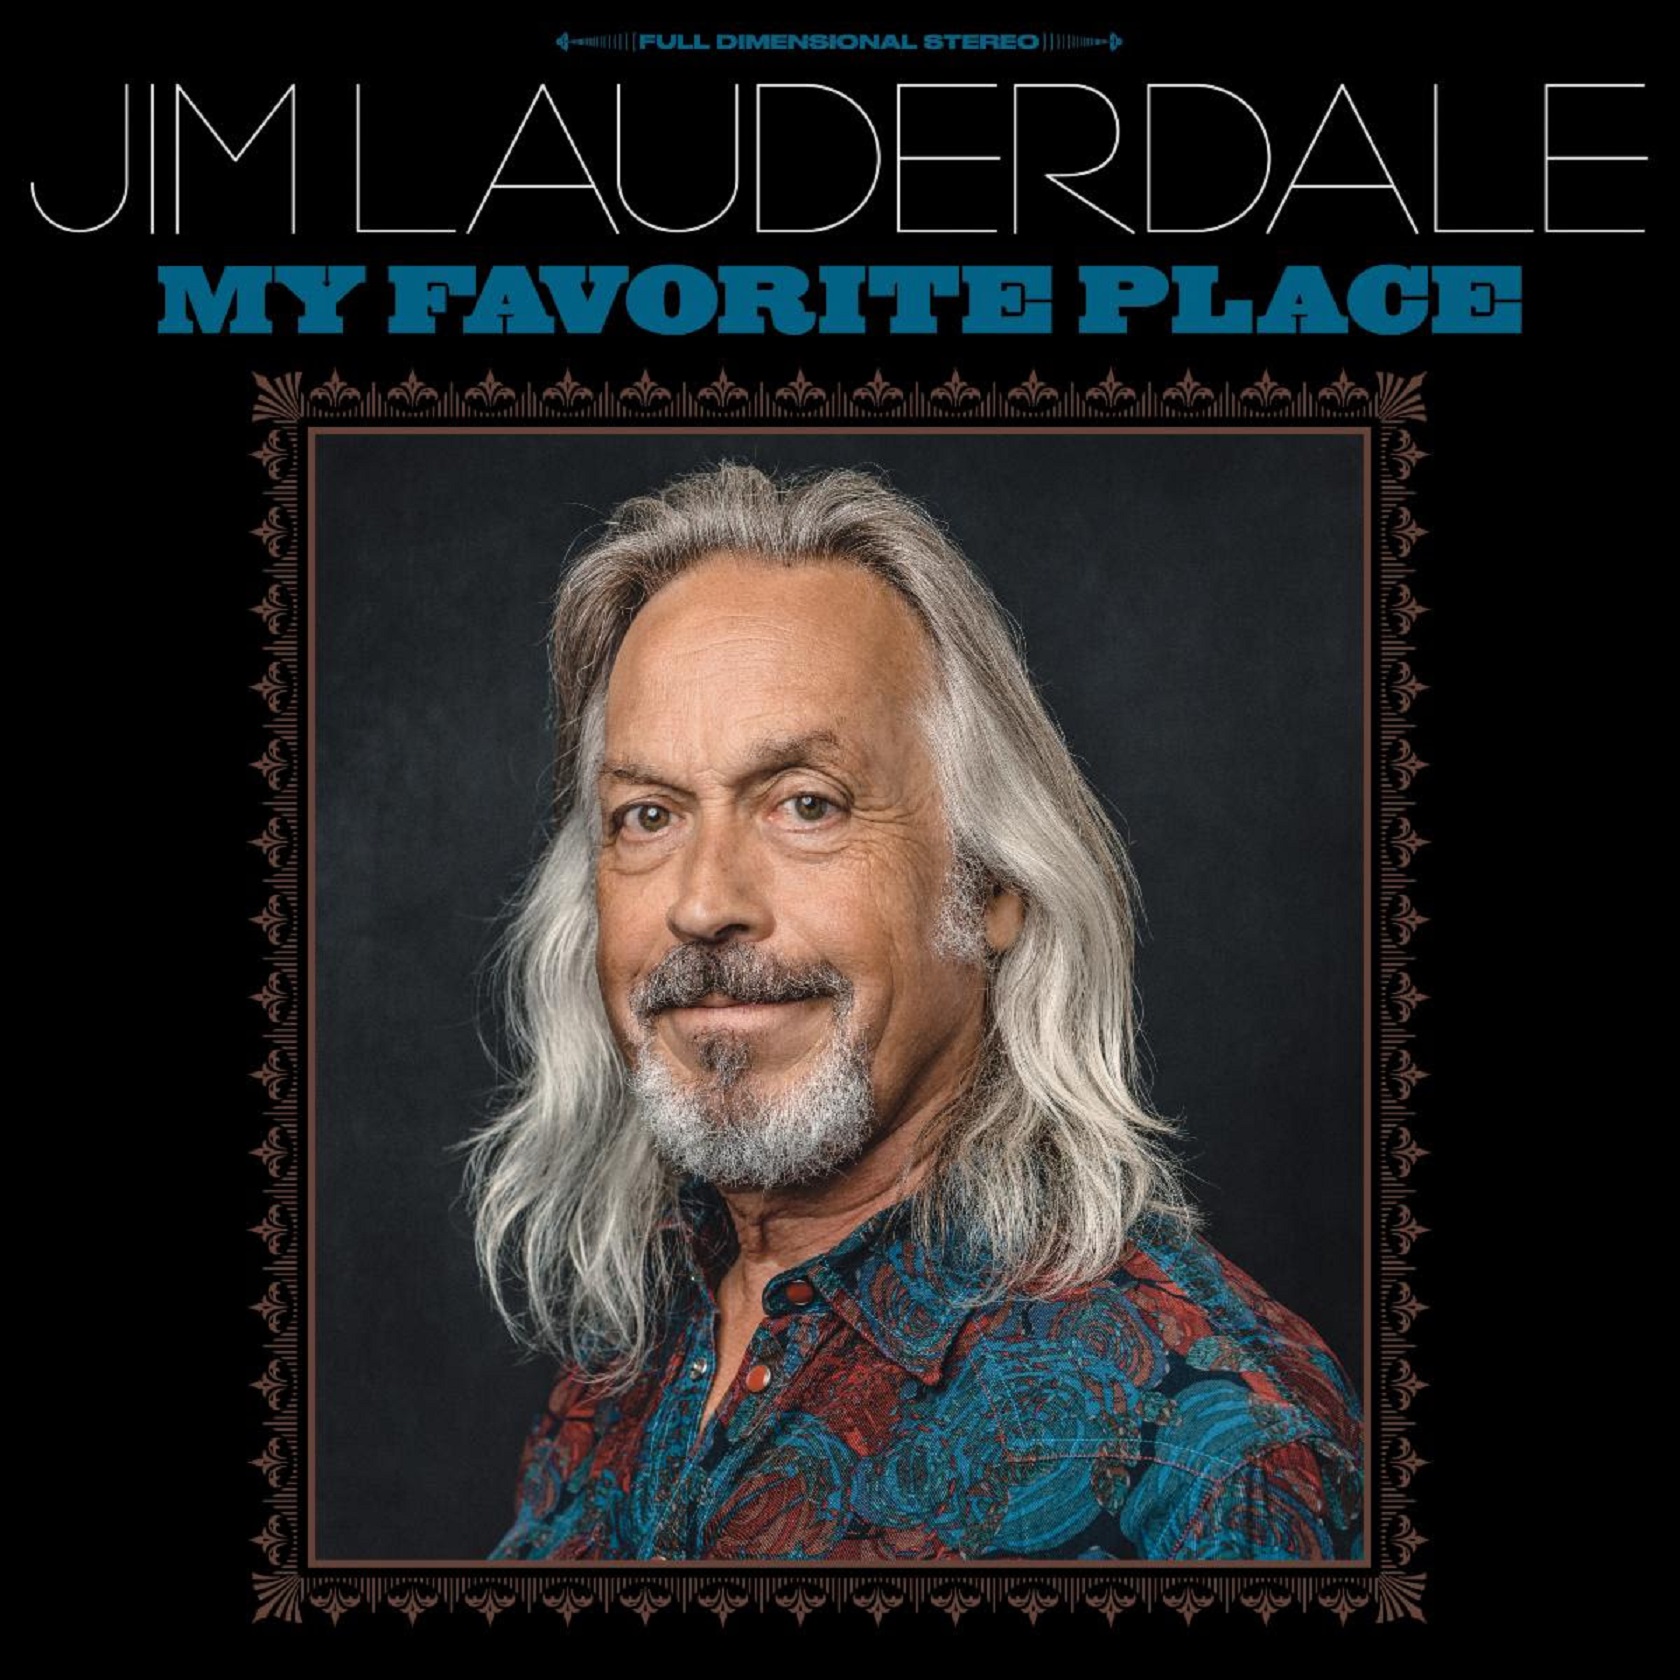 Jim Lauderdale’s Latest Album My Favorite Place Highlights Mr. Americana’s Brand Of Classic Country Music